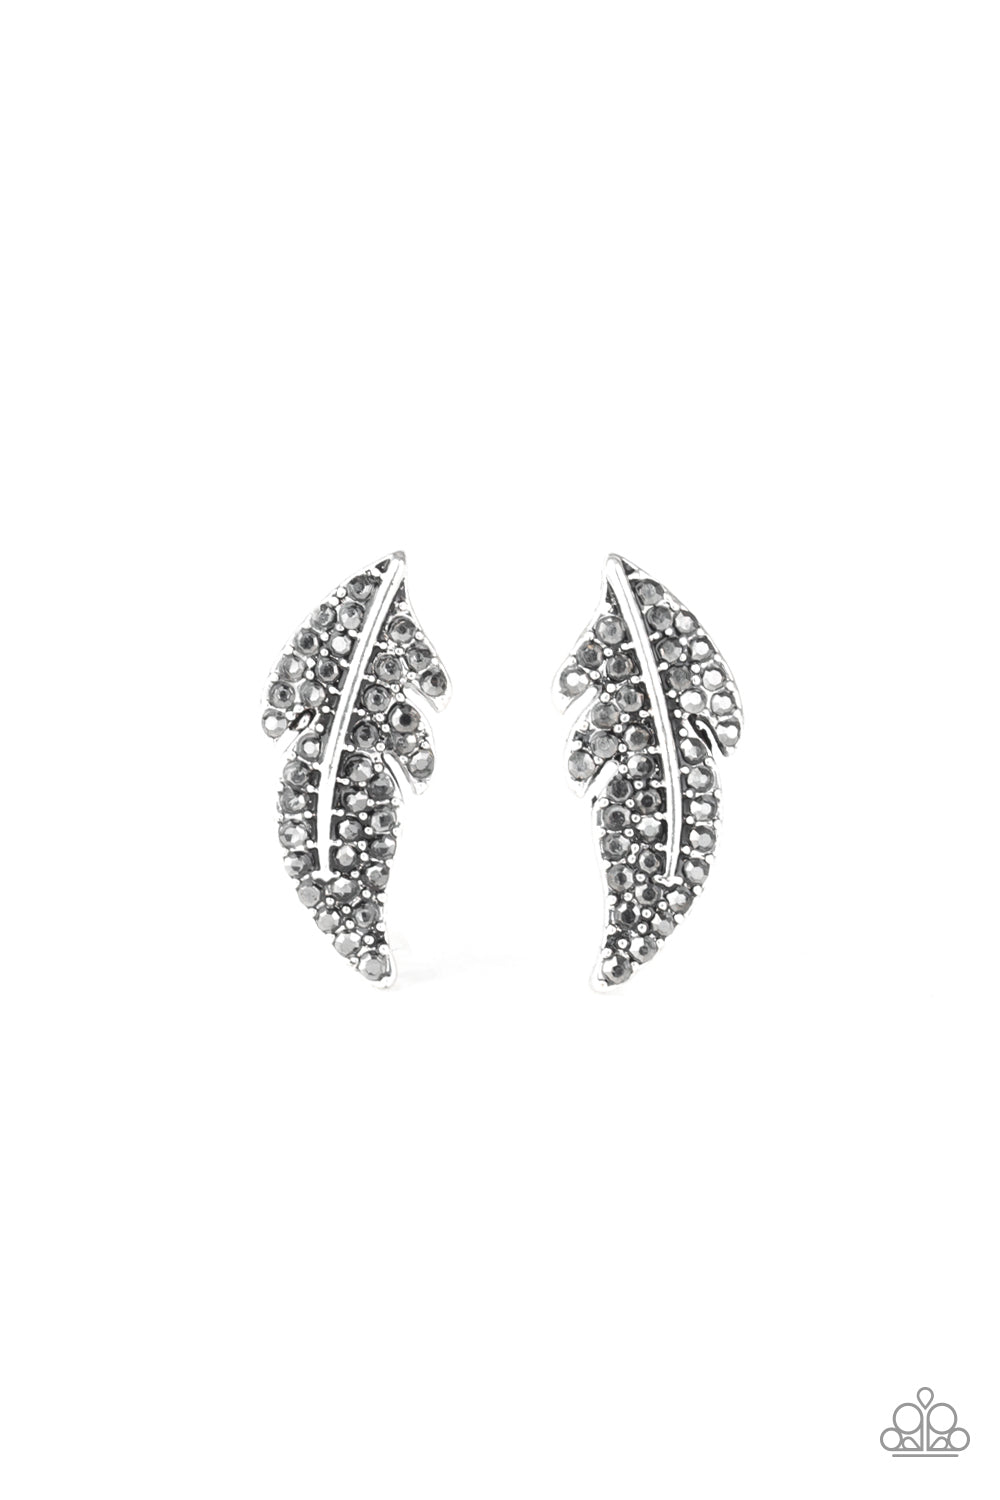 Feathered Fortune Earrings - Silver